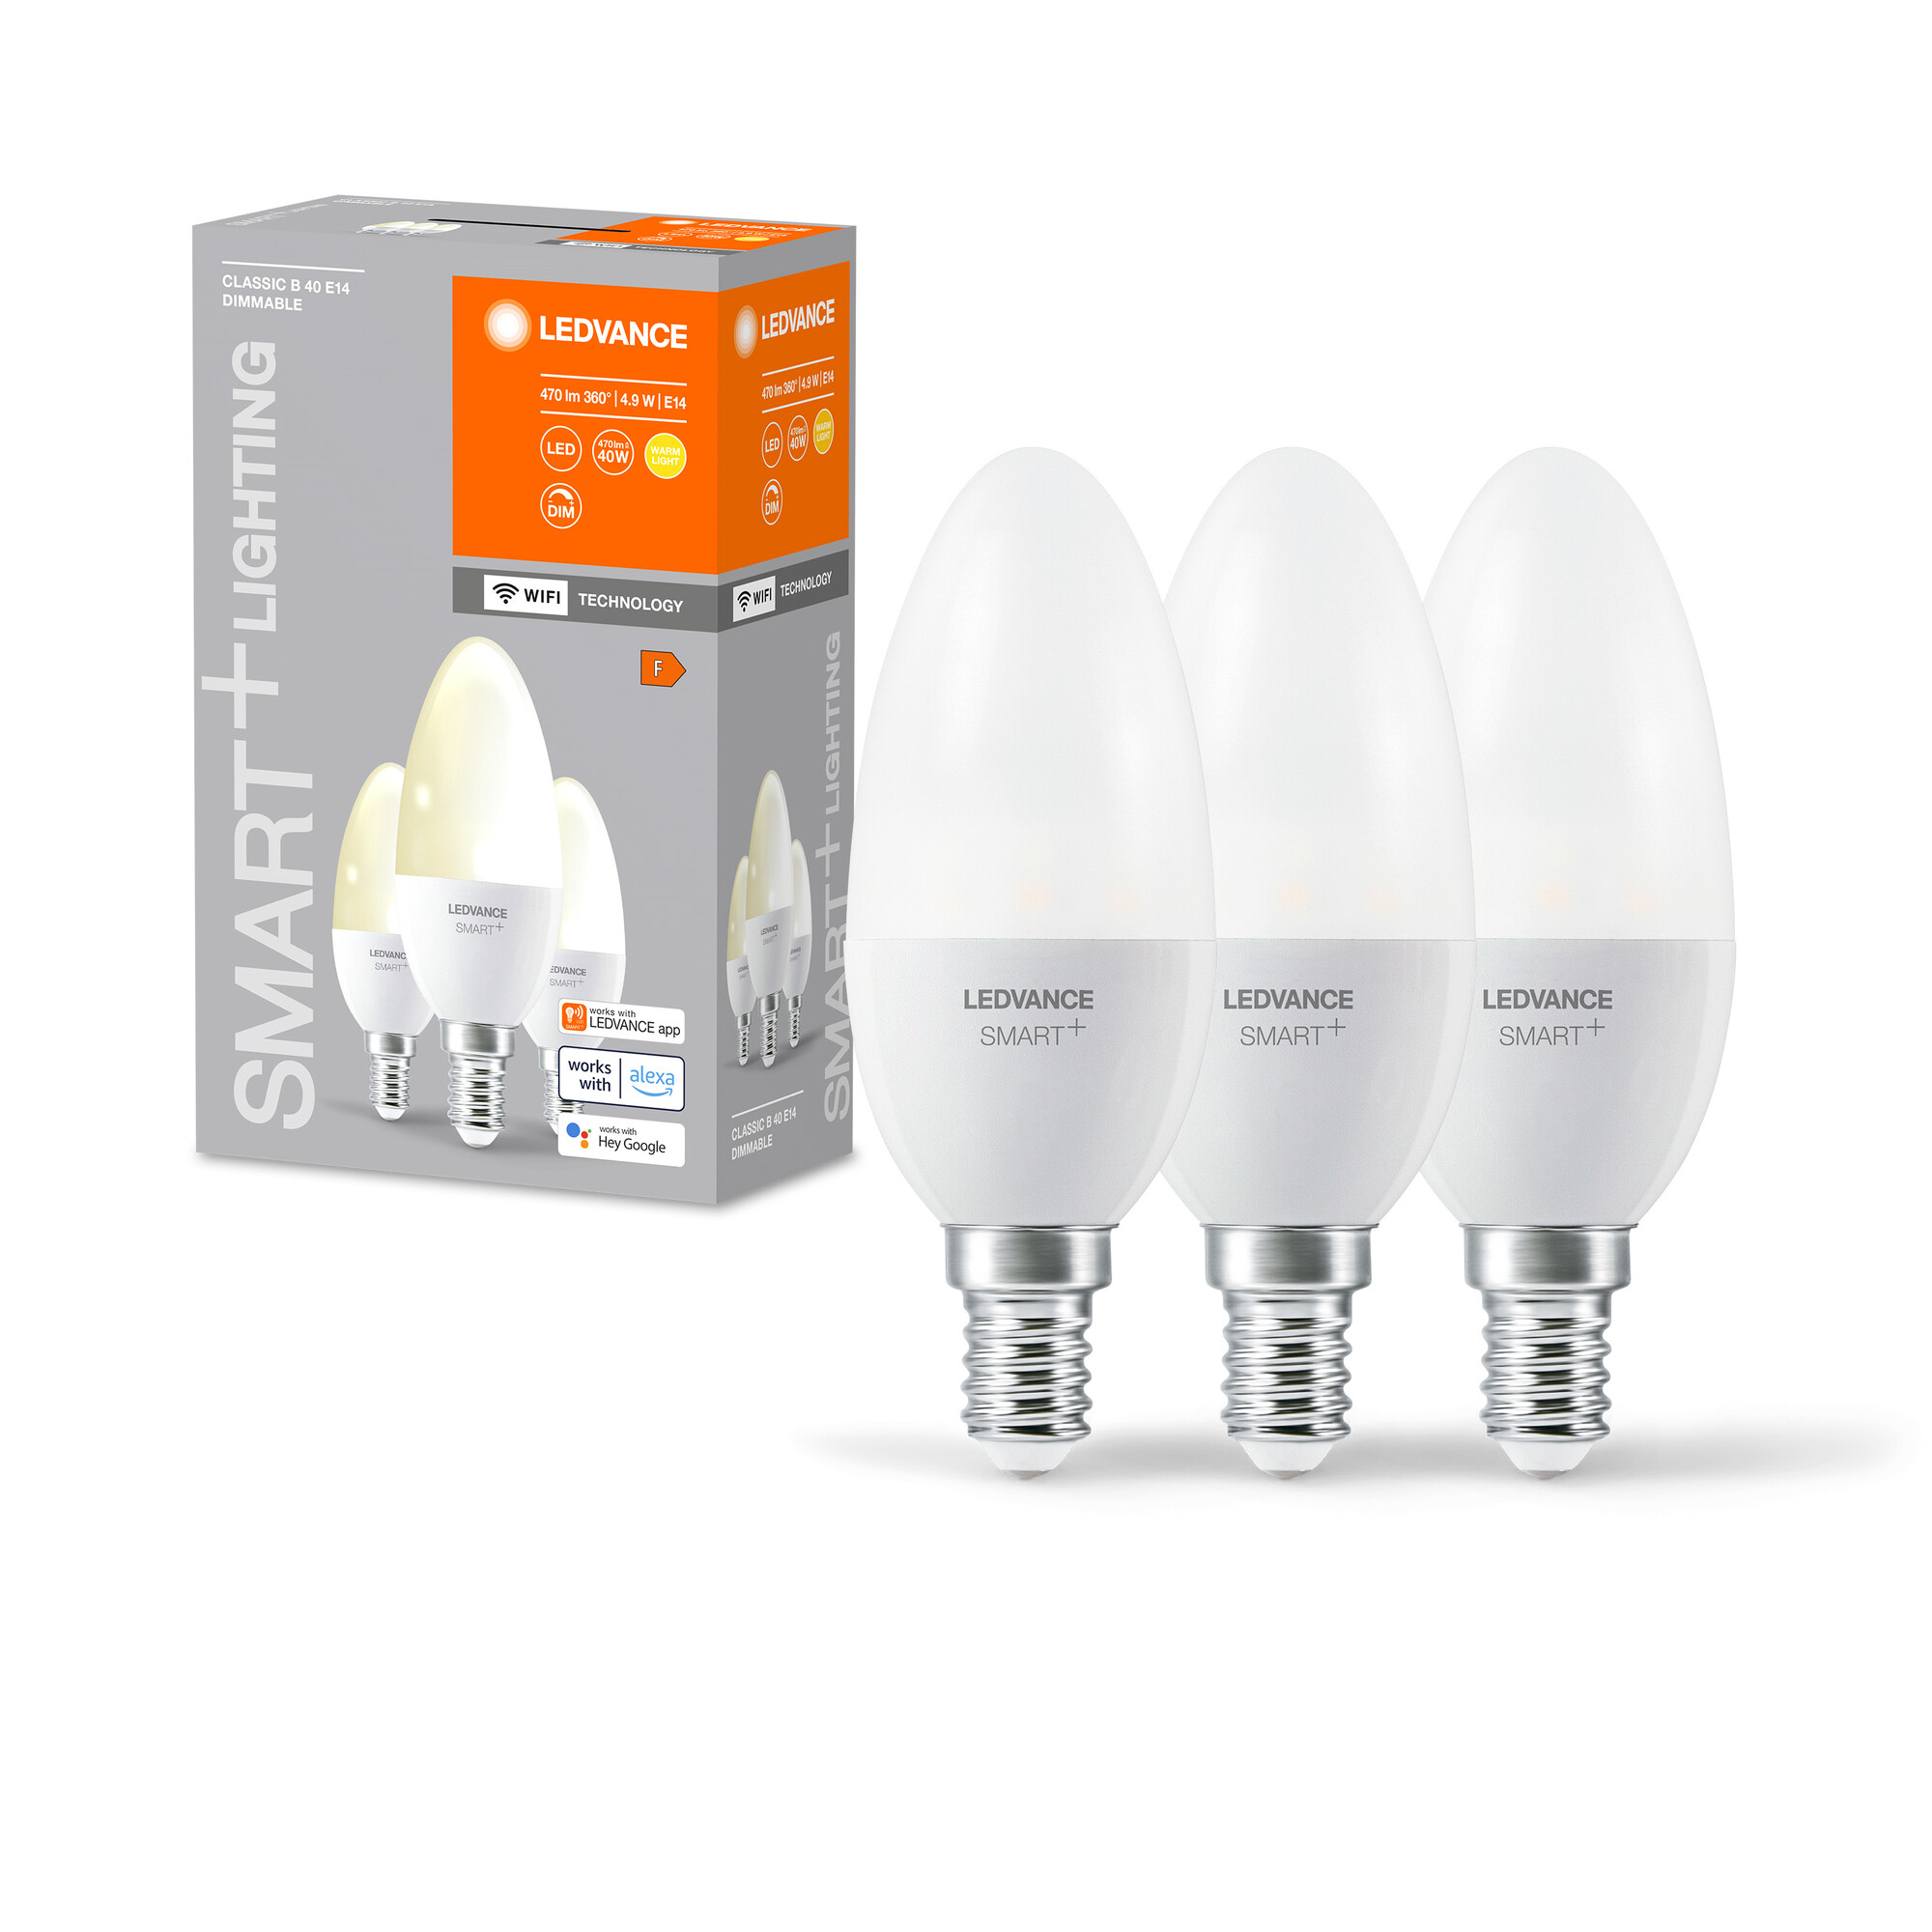 LED-Kerzenlampe 'Smart+ WiFi CLB' warmweiß 4,9 W E14 470 lm, dimmbar 3er-Pack + product picture